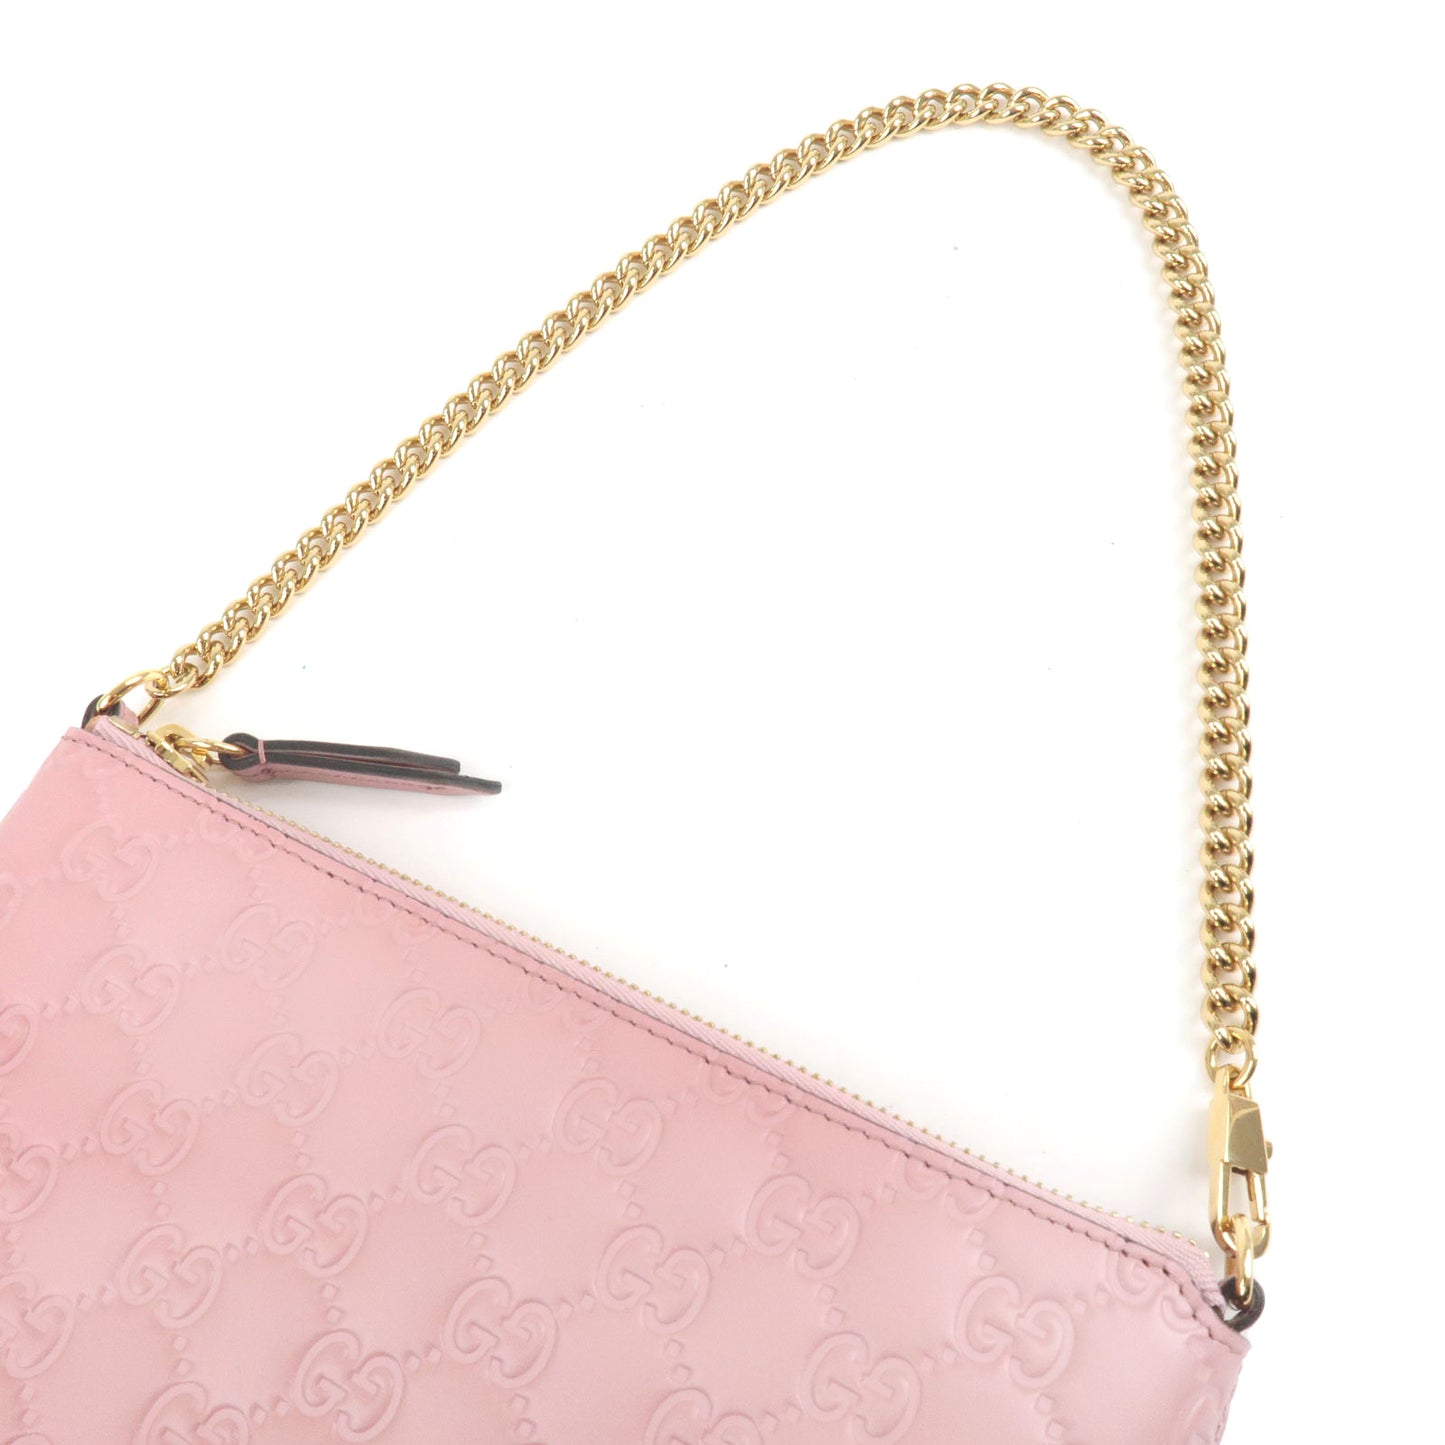 GUCCI Guccissima Leather Wristlet Chain Wallet Pink 428449